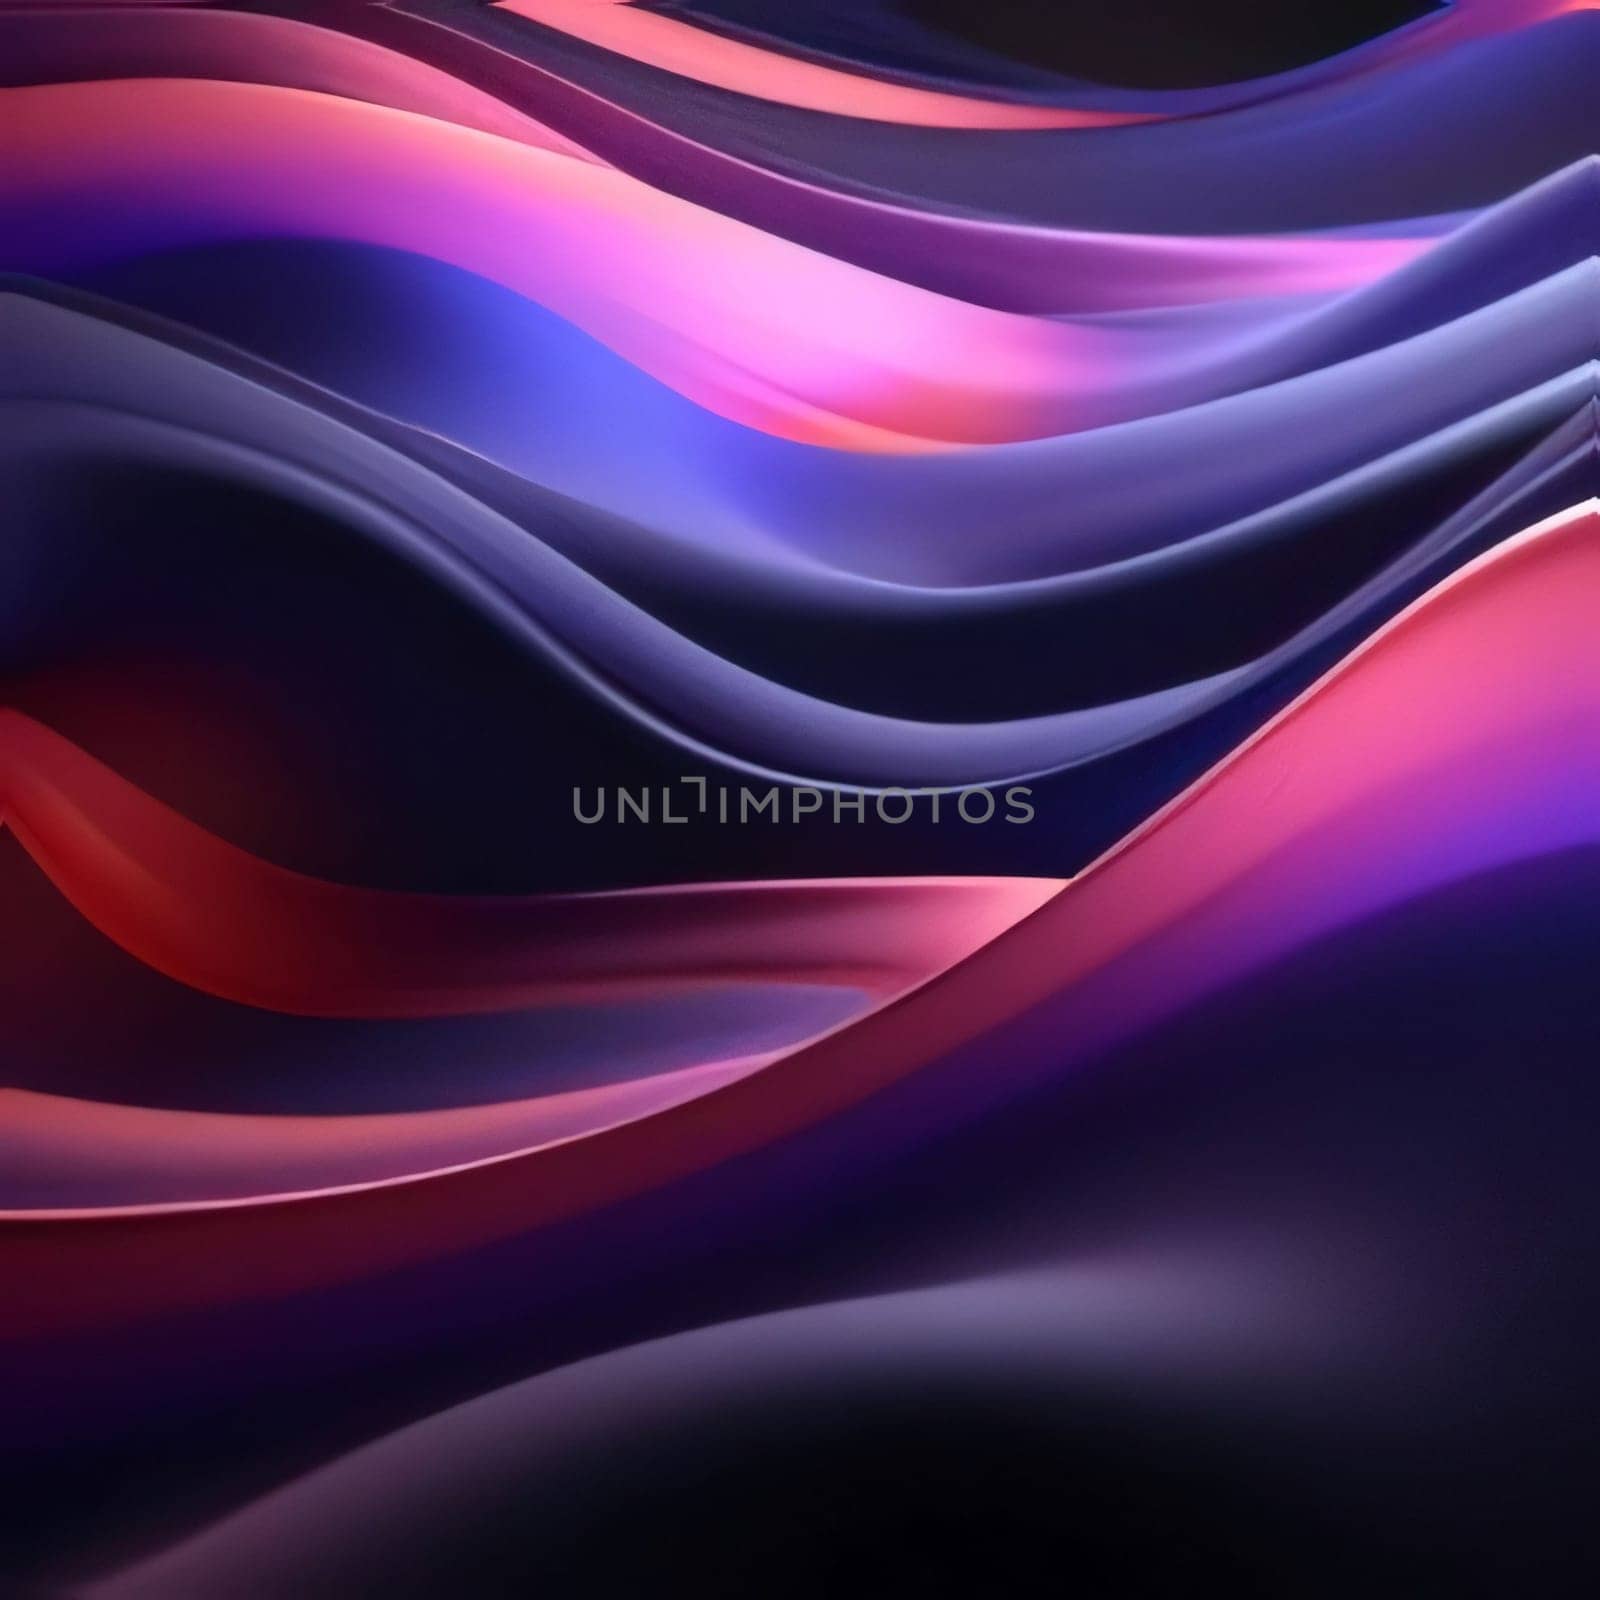 Abstract background design: abstract background with smooth wavy lines in blue and purple colors